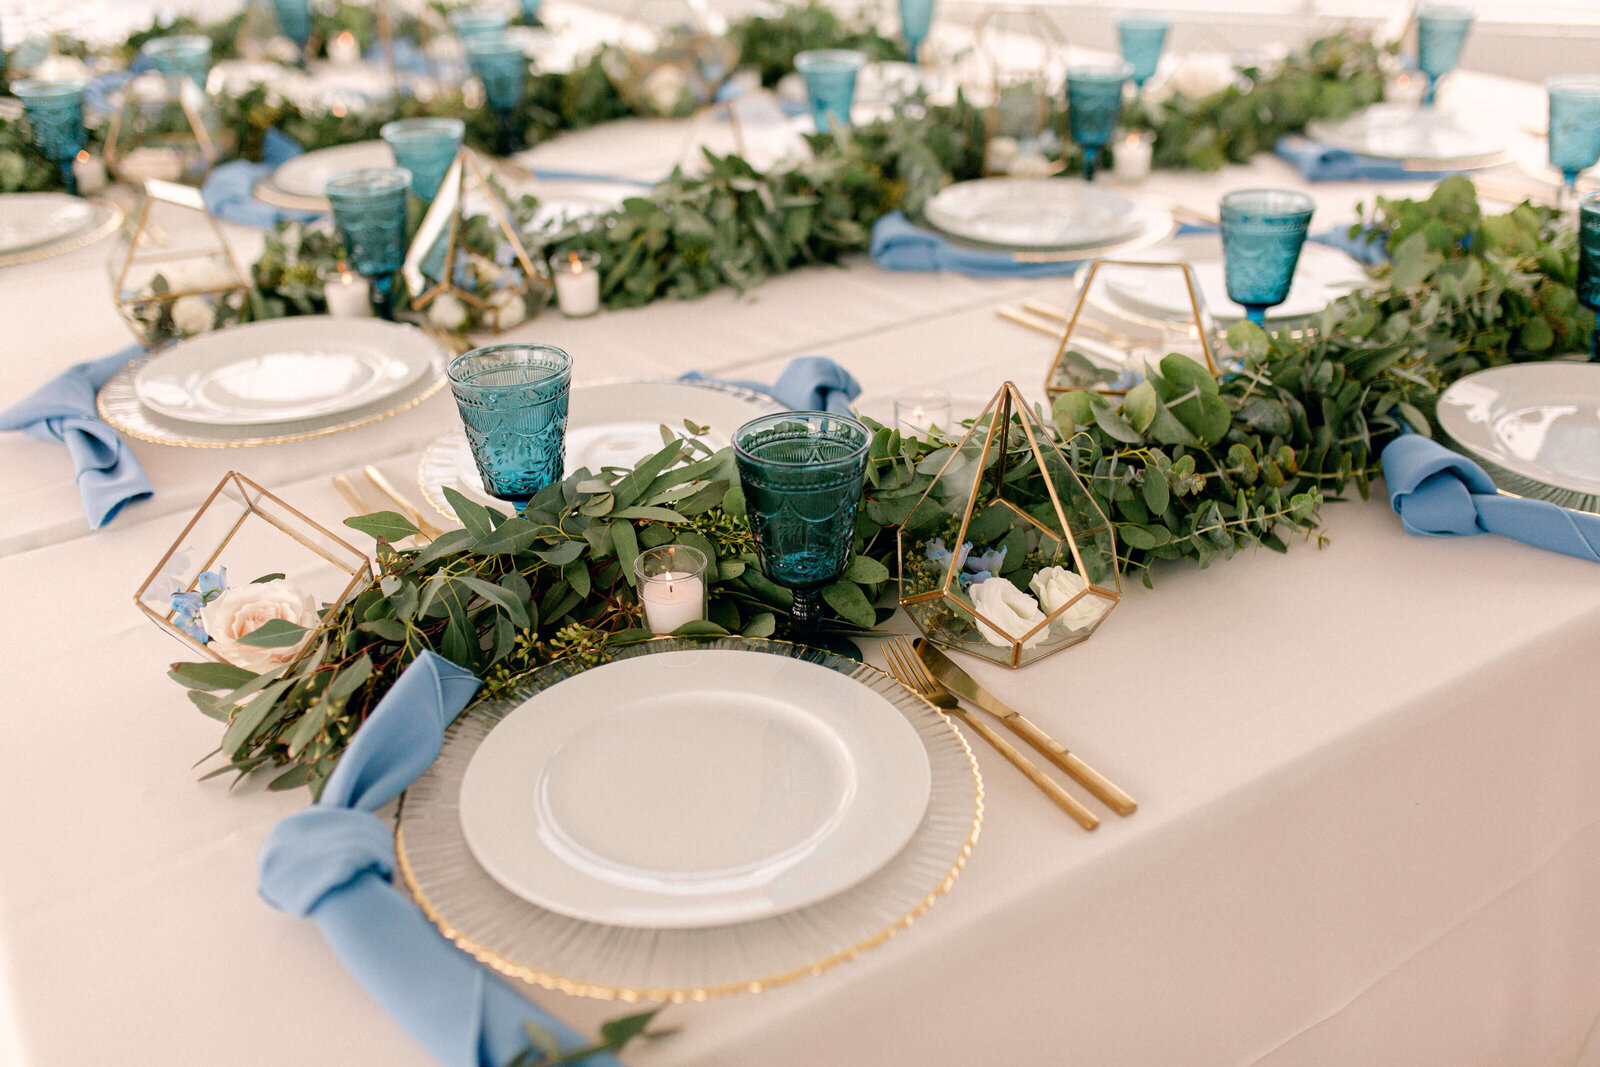 Virginia-Beach-Wedding-Planners-Sincerely-Jane-Events-8052